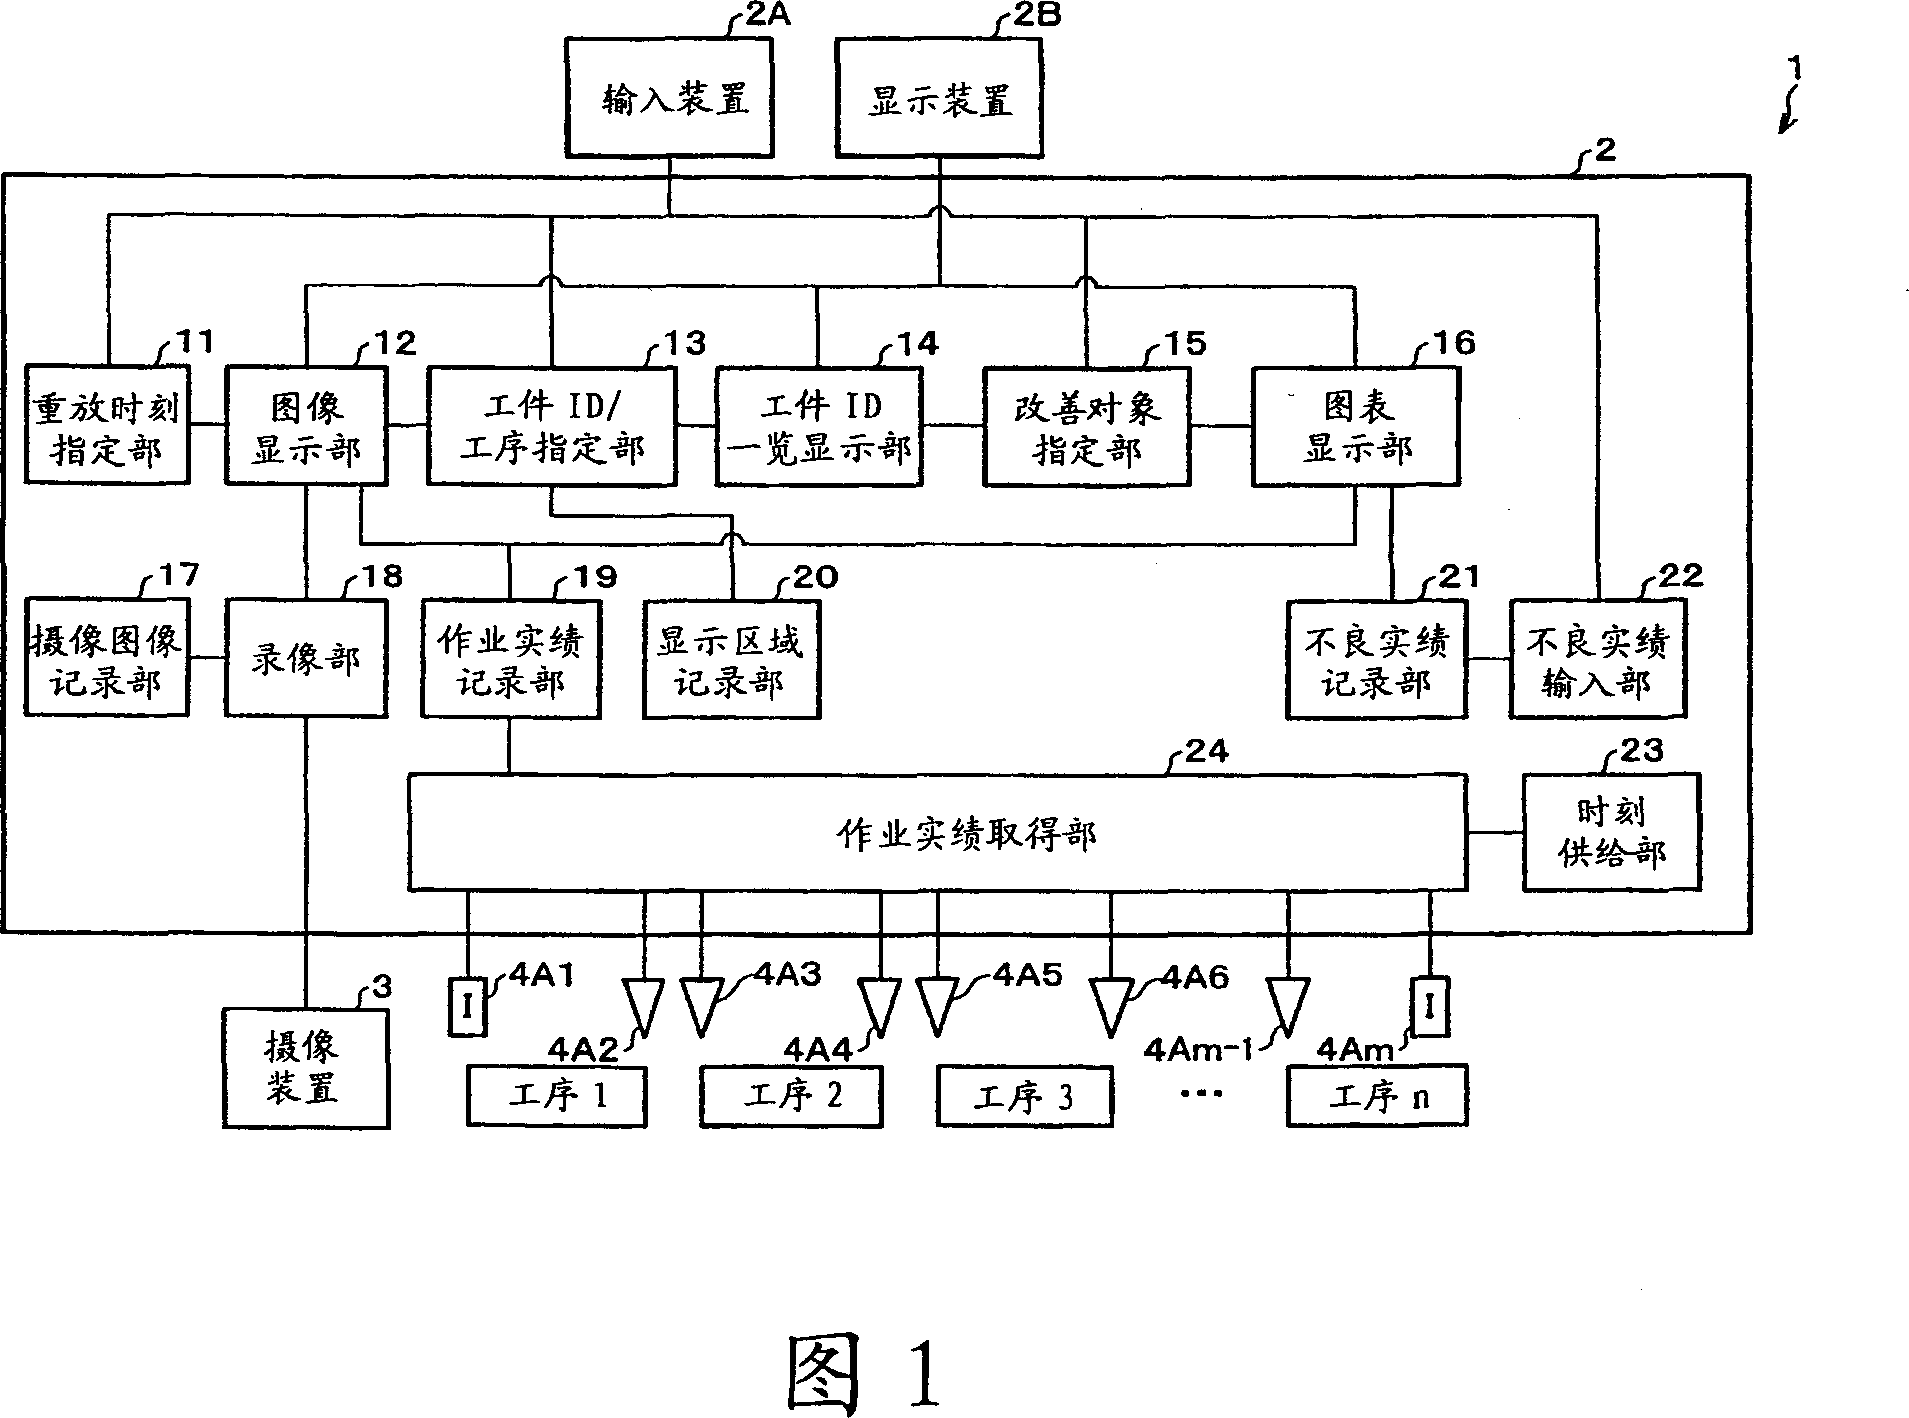 Production management device, method and system